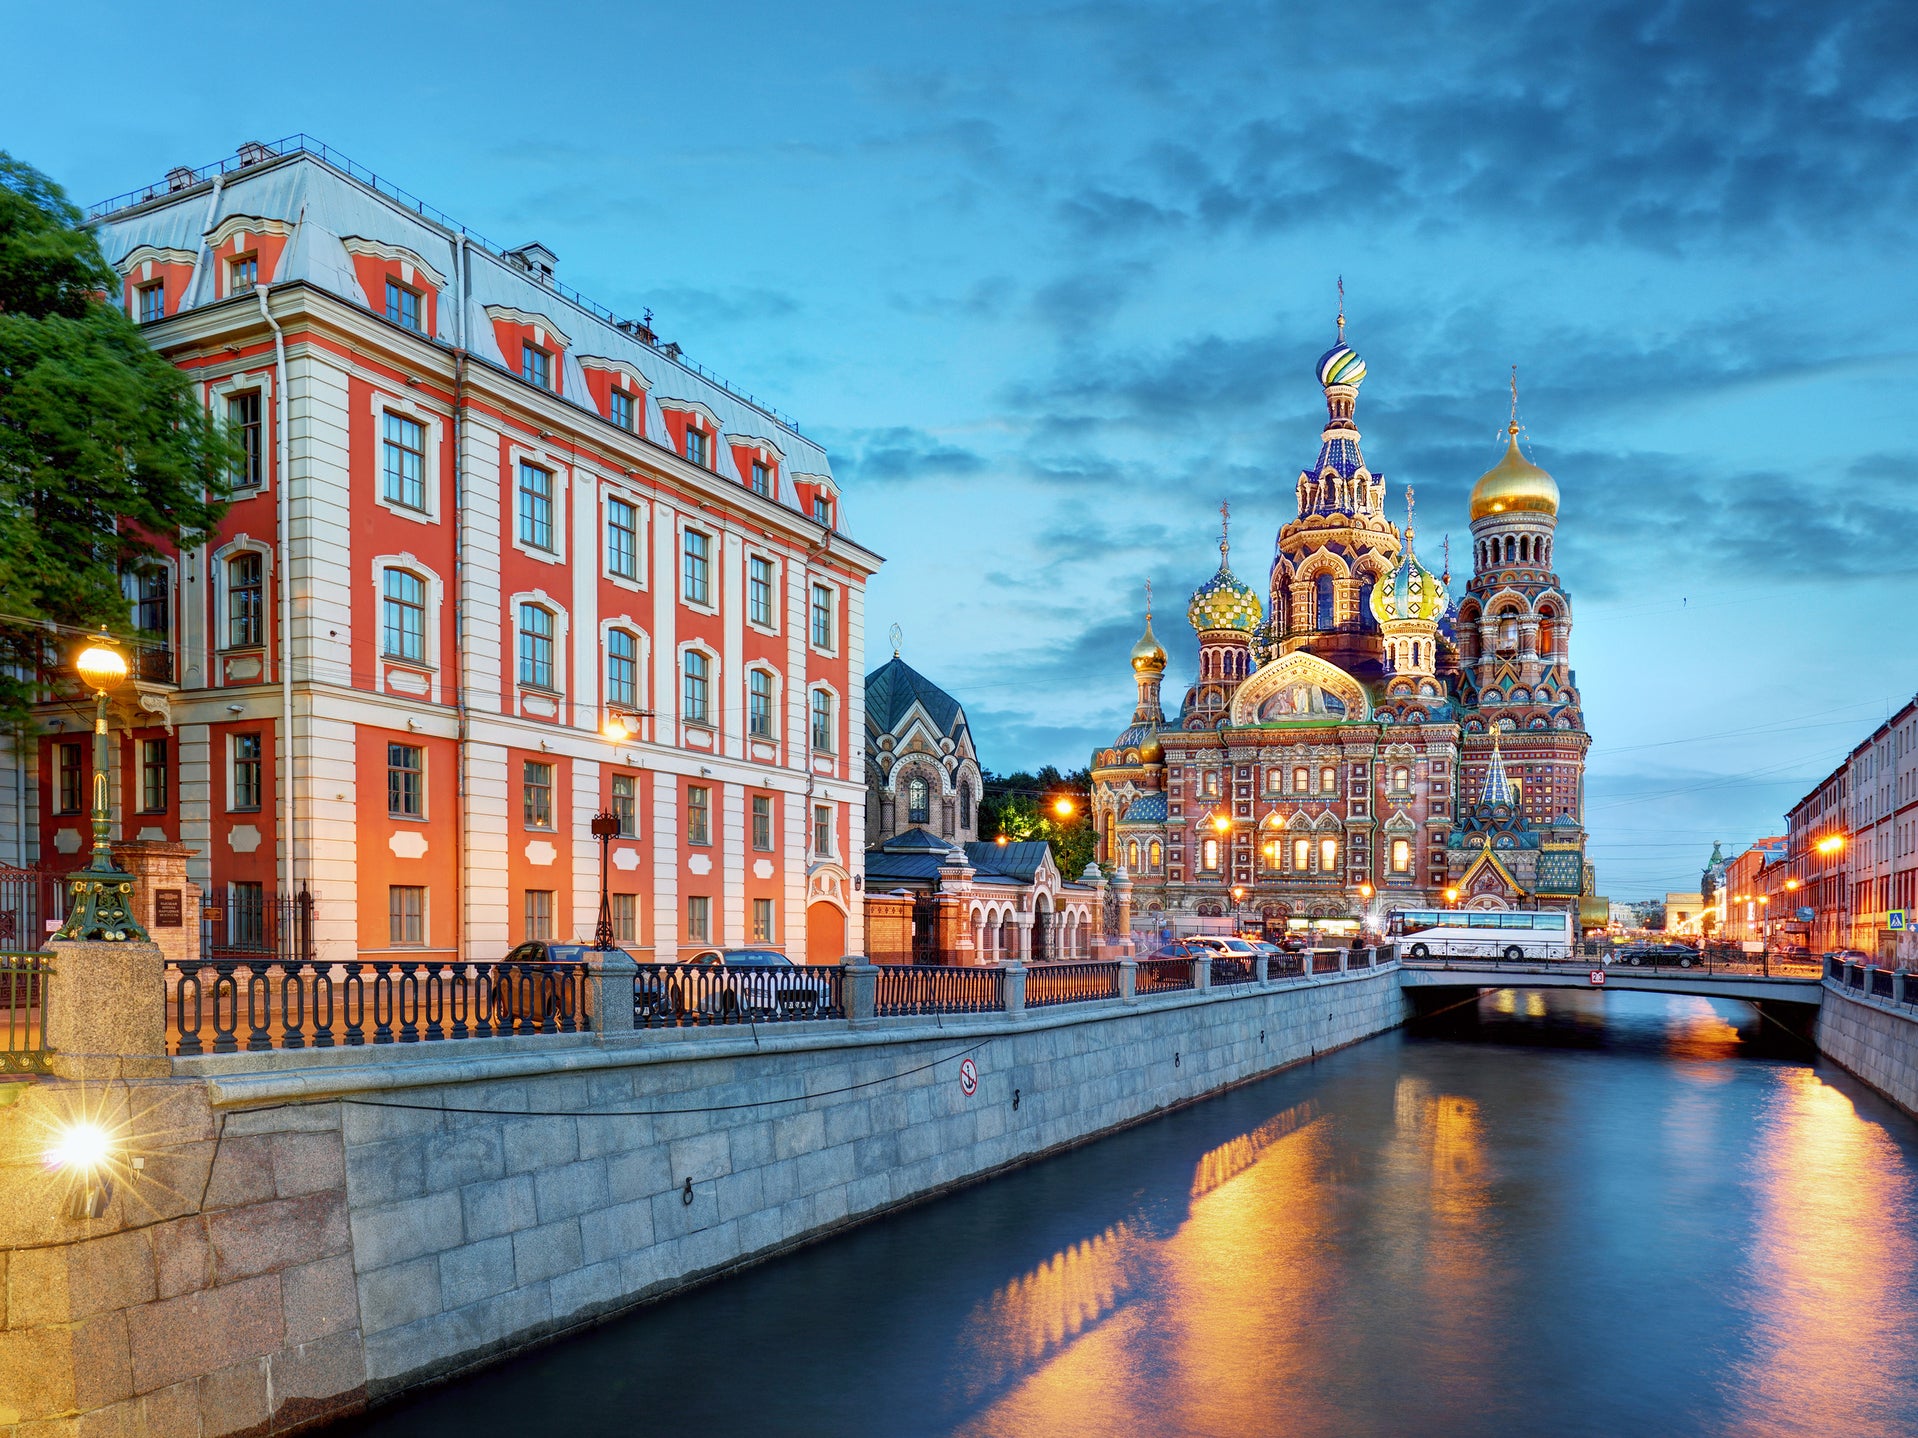 The chances of getting to St Petersburg are low – but pay up anyway